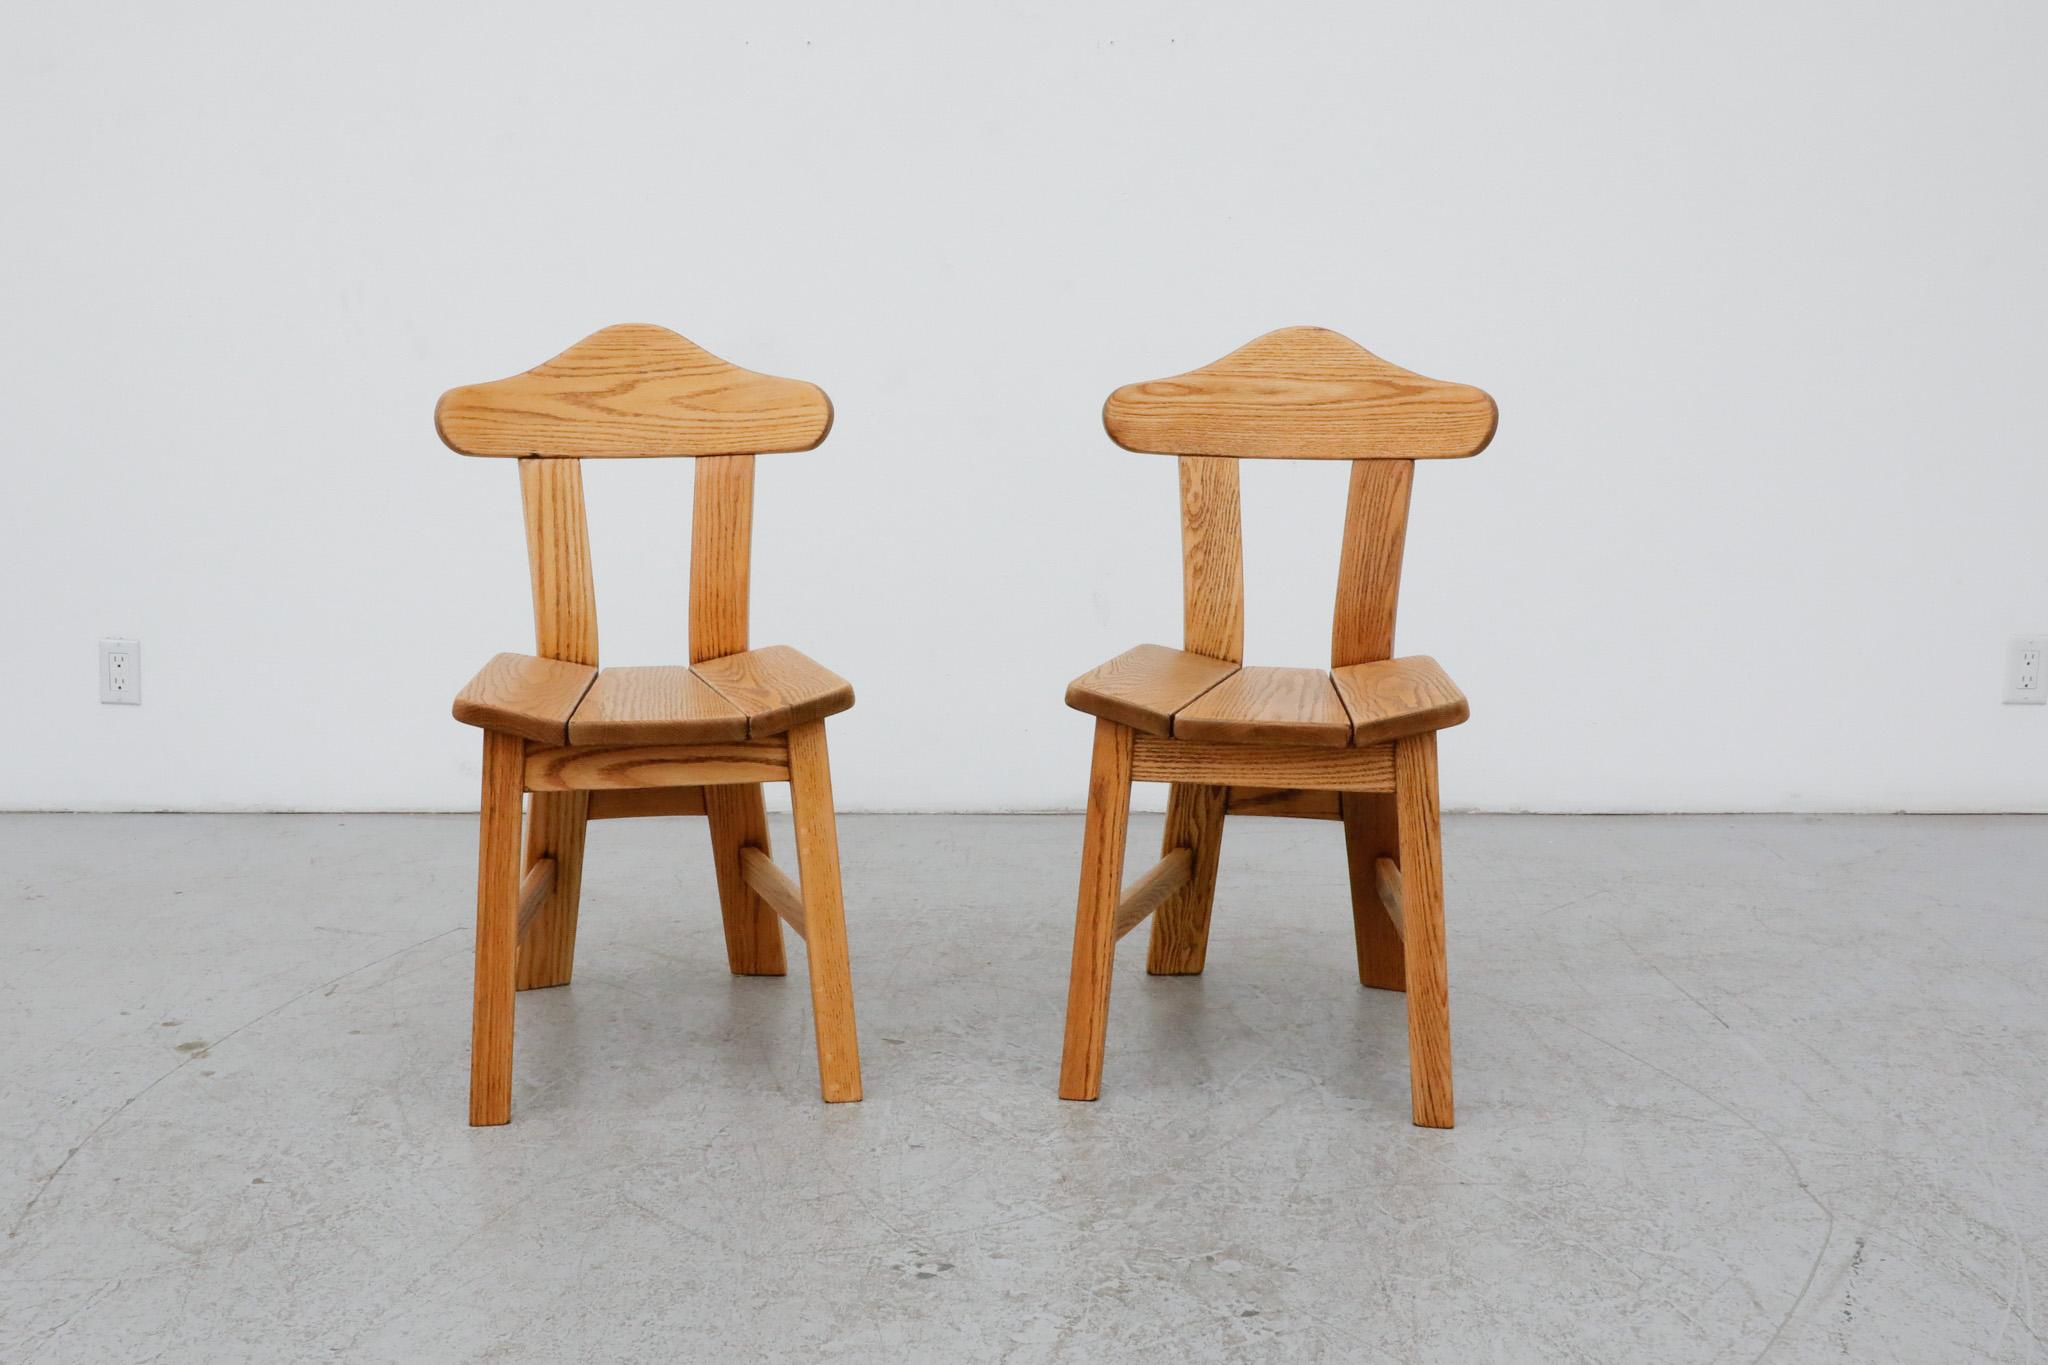 Brutalist oak side chairs inspired by the work of Danish Mid-Century designer Rainer Daumiller. Perfect accent chairs, handsomely crafted from attractively hued natural oak. Lightly refinished in otherwise original condition with visible wear,